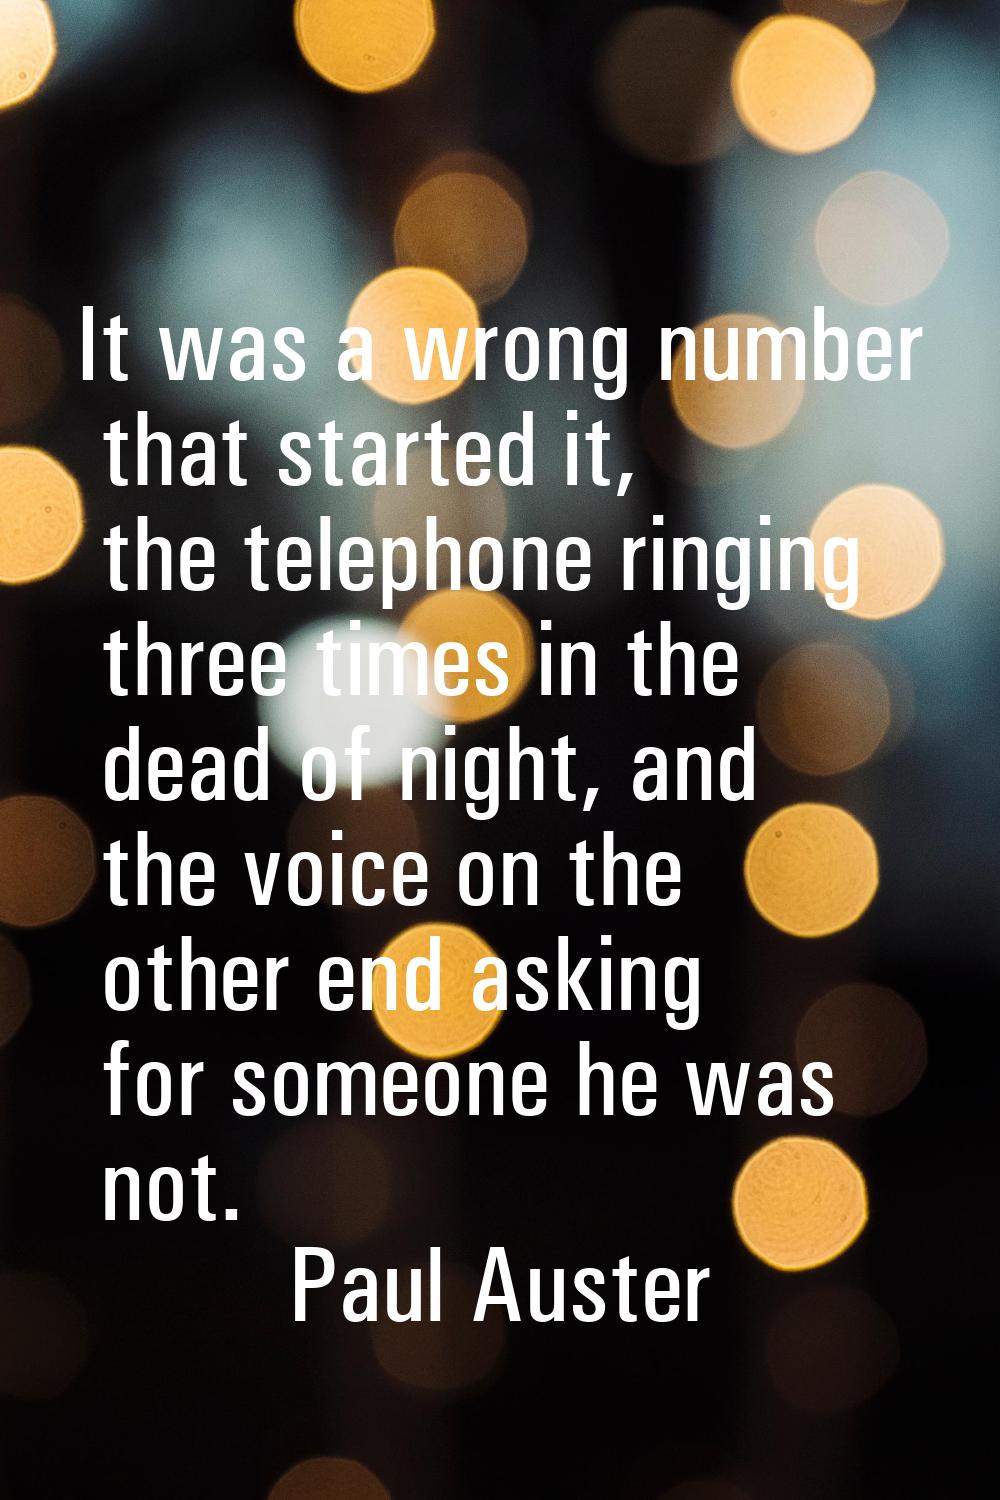 It was a wrong number that started it, the telephone ringing three times in the dead of night, and 